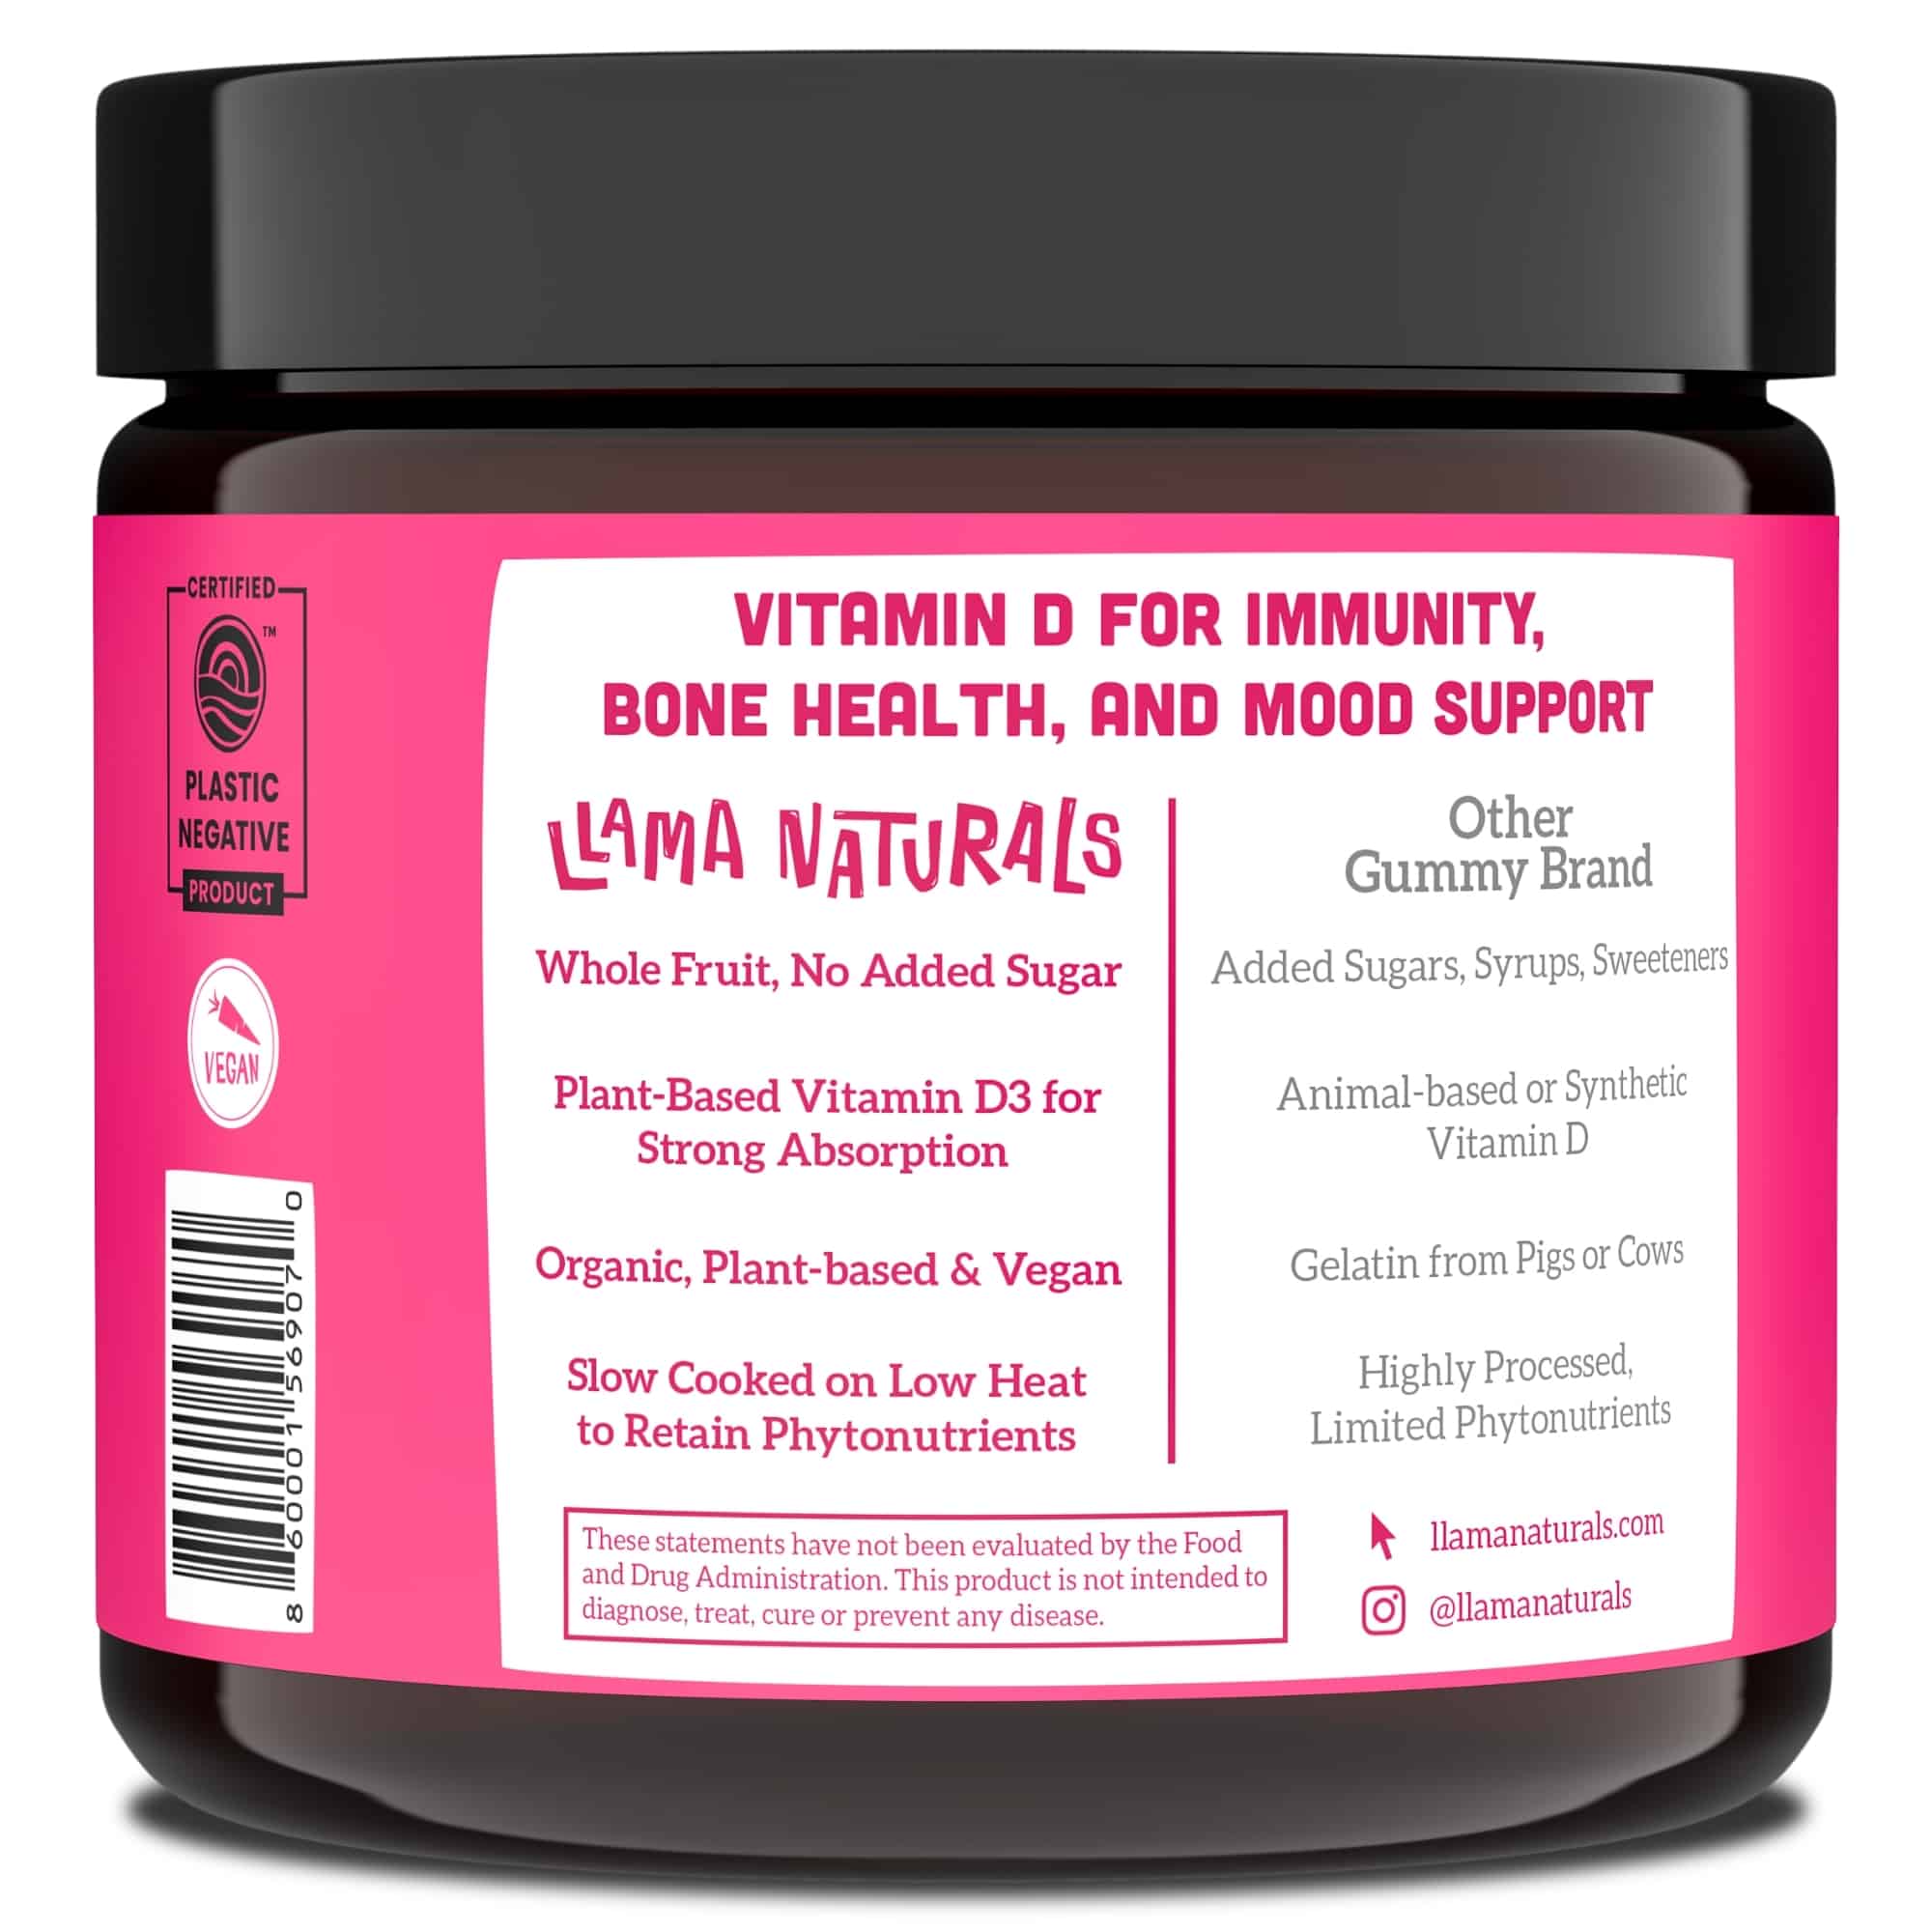 GreenStar Food Co+op - Check out this NEW product we're carrying in our  Wellness Department - Llama Naturals gummy vitamins for adults and kids are  made with no sugars, gelatin, sweeteners, artificial